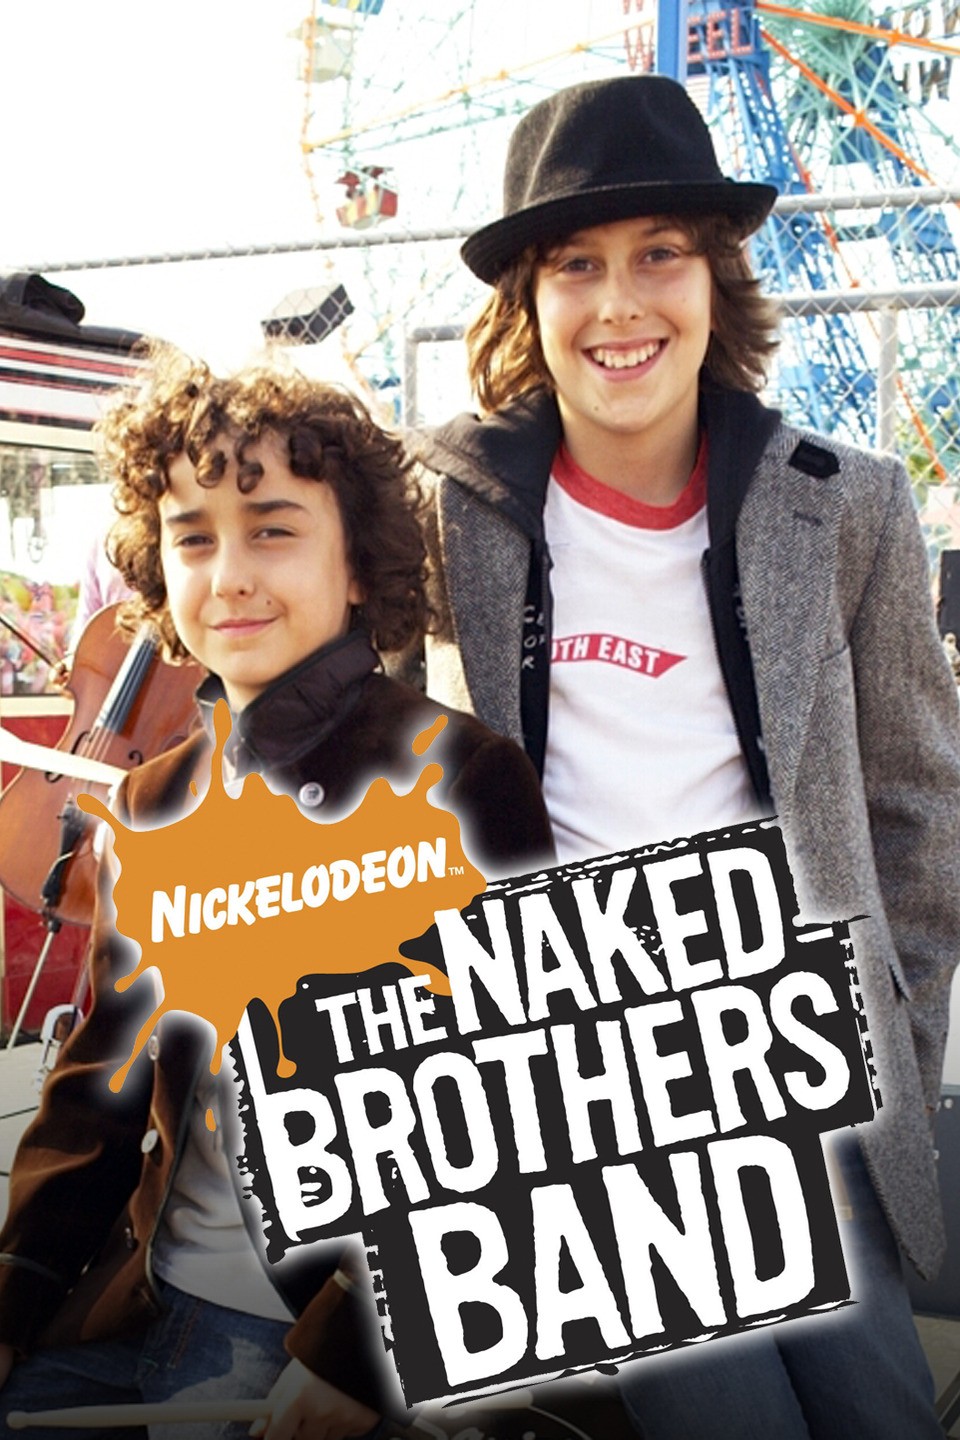 Prime Video: The Naked Brothers Band Season 2